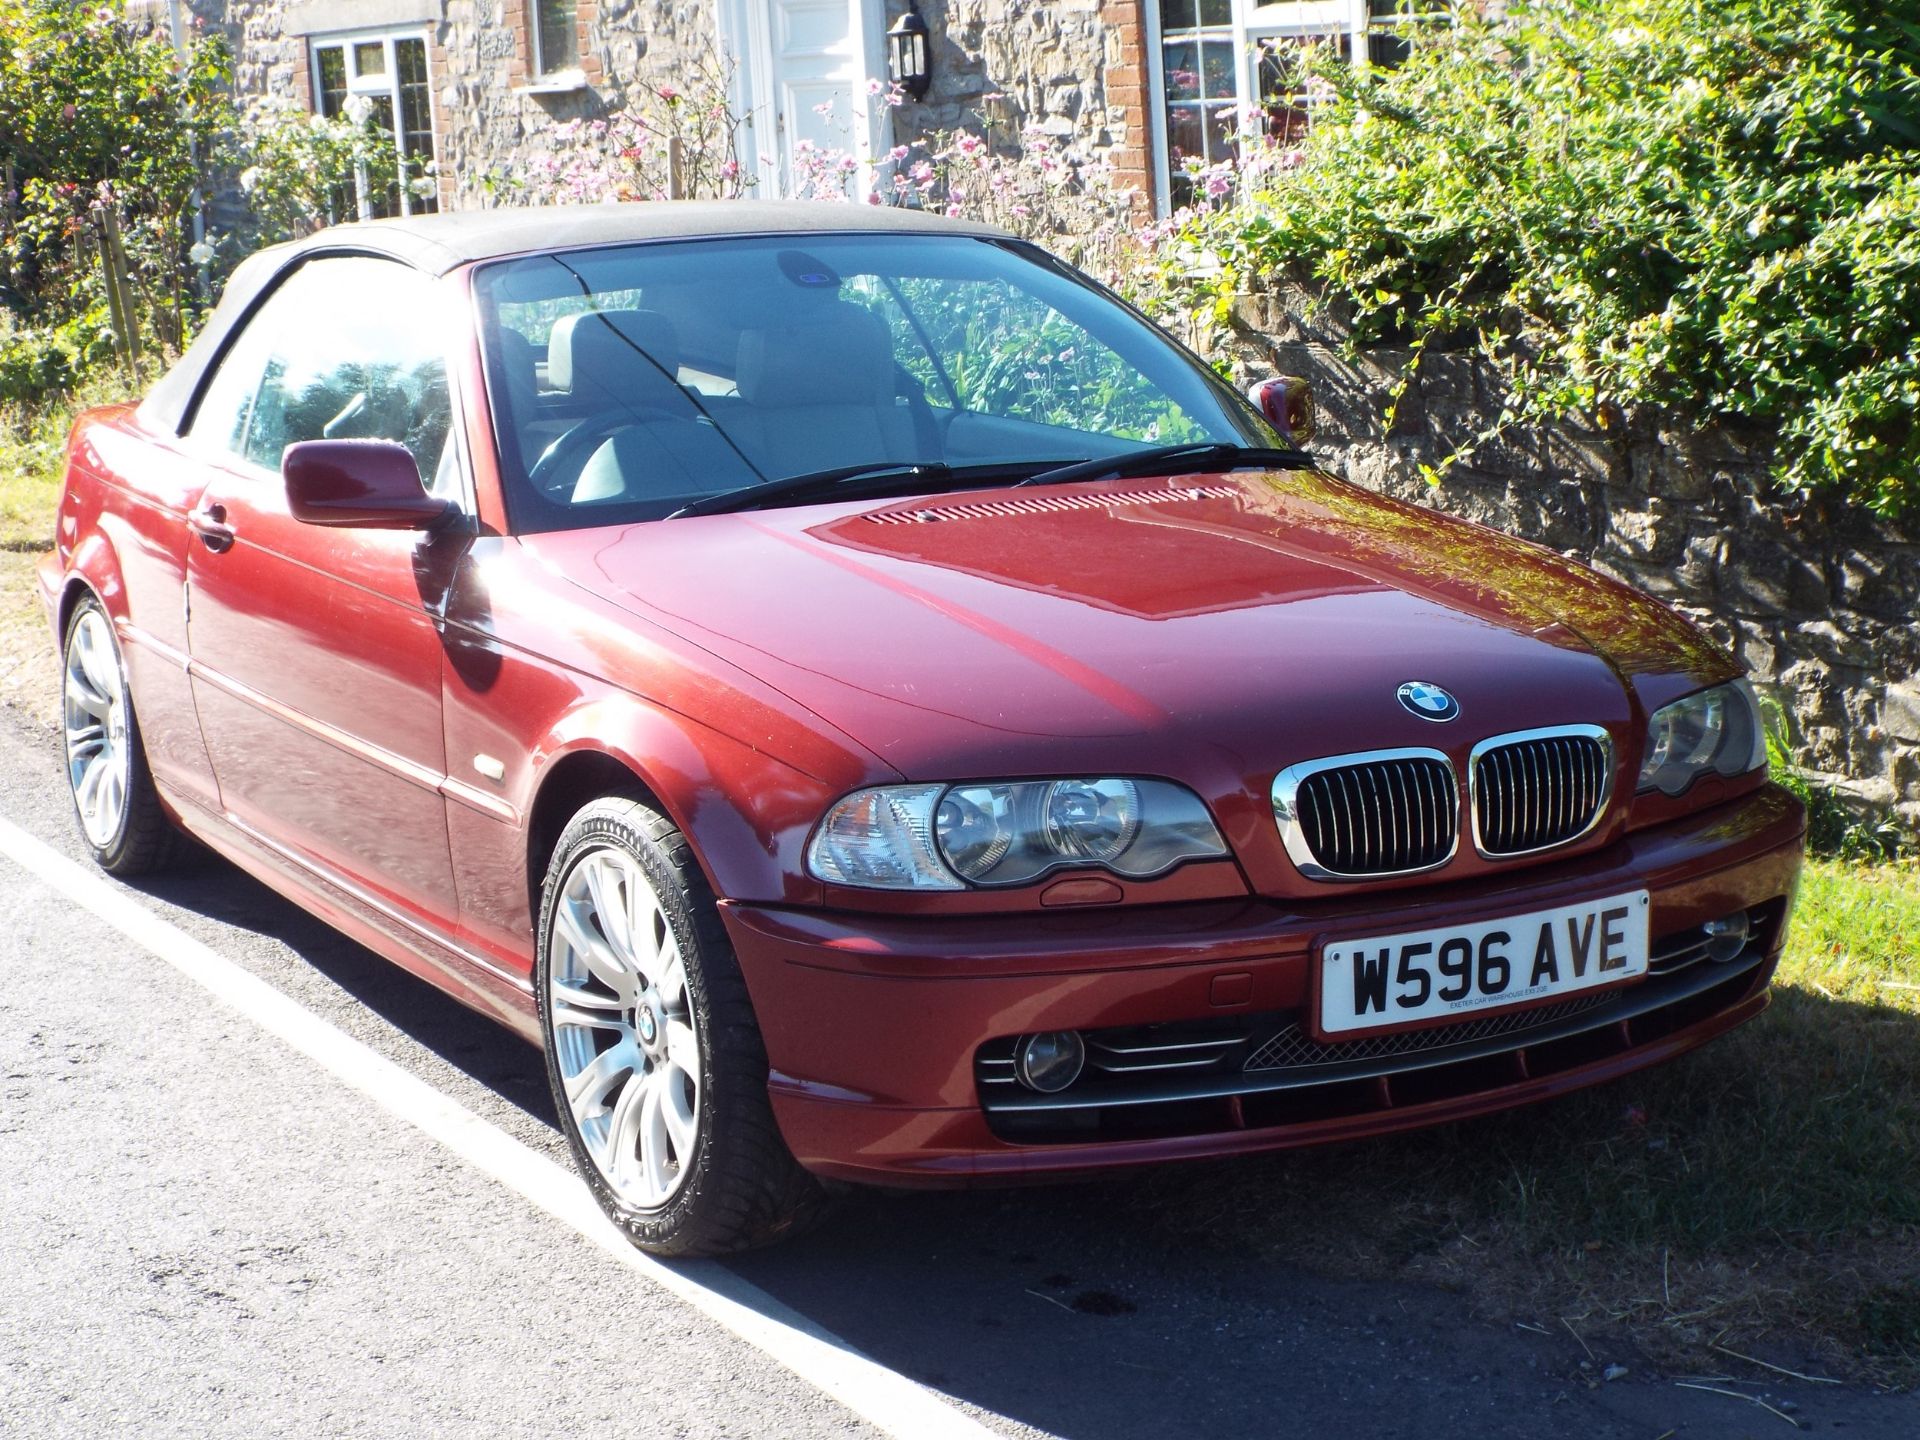 2000 BMW 330Ci Convertible Registration number W596 AVE Chassis number WBABS52060EH92204 Engine - Image 4 of 16